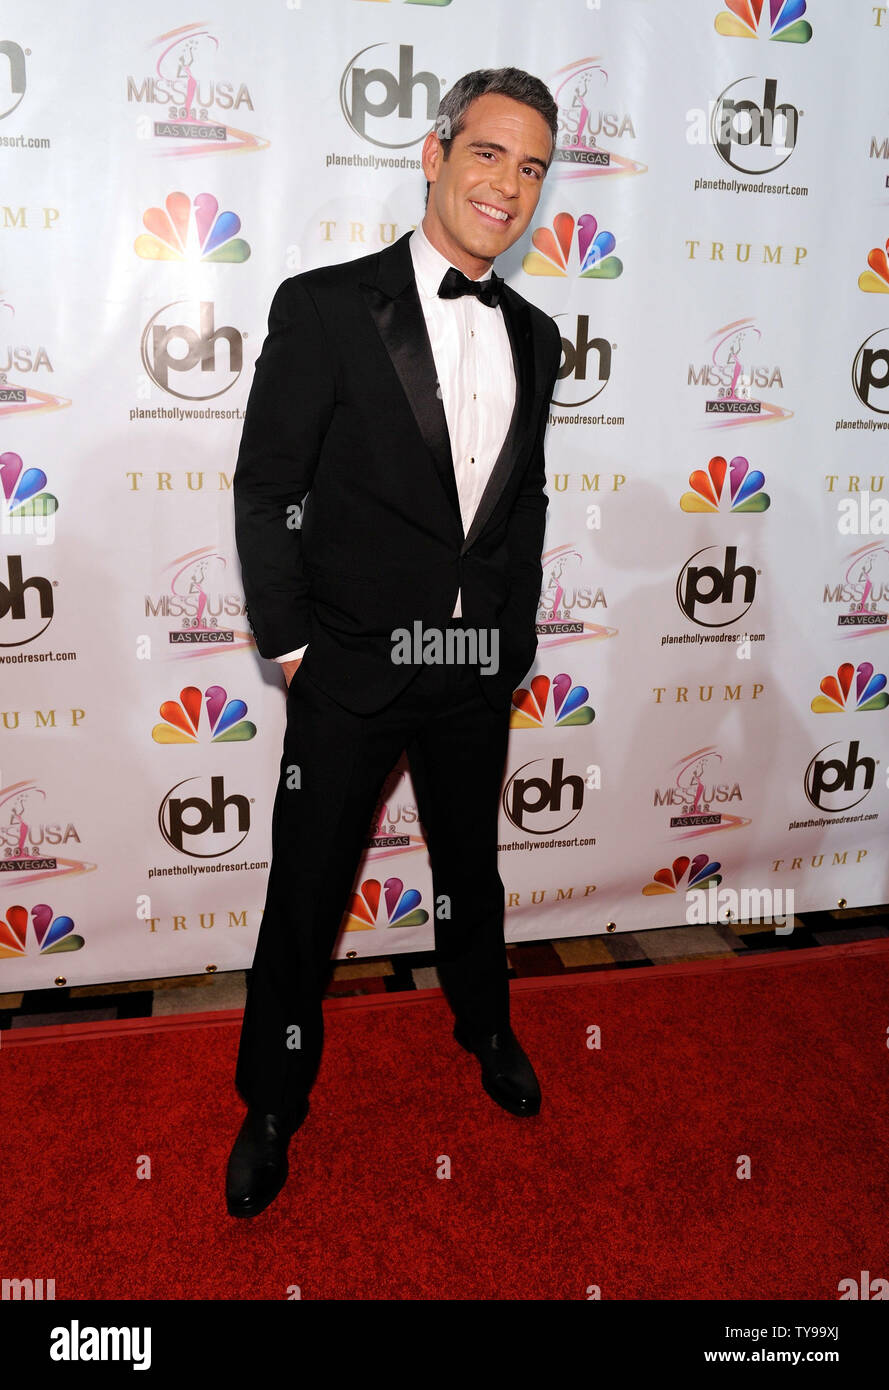 Television personality Andy Cohen arrives at the 2012 Miss USA competition at the Planet Hollywood Resort and Casino in Las Vegas, Nevada on June 3, 2012.  UPI/David Becker Stock Photo